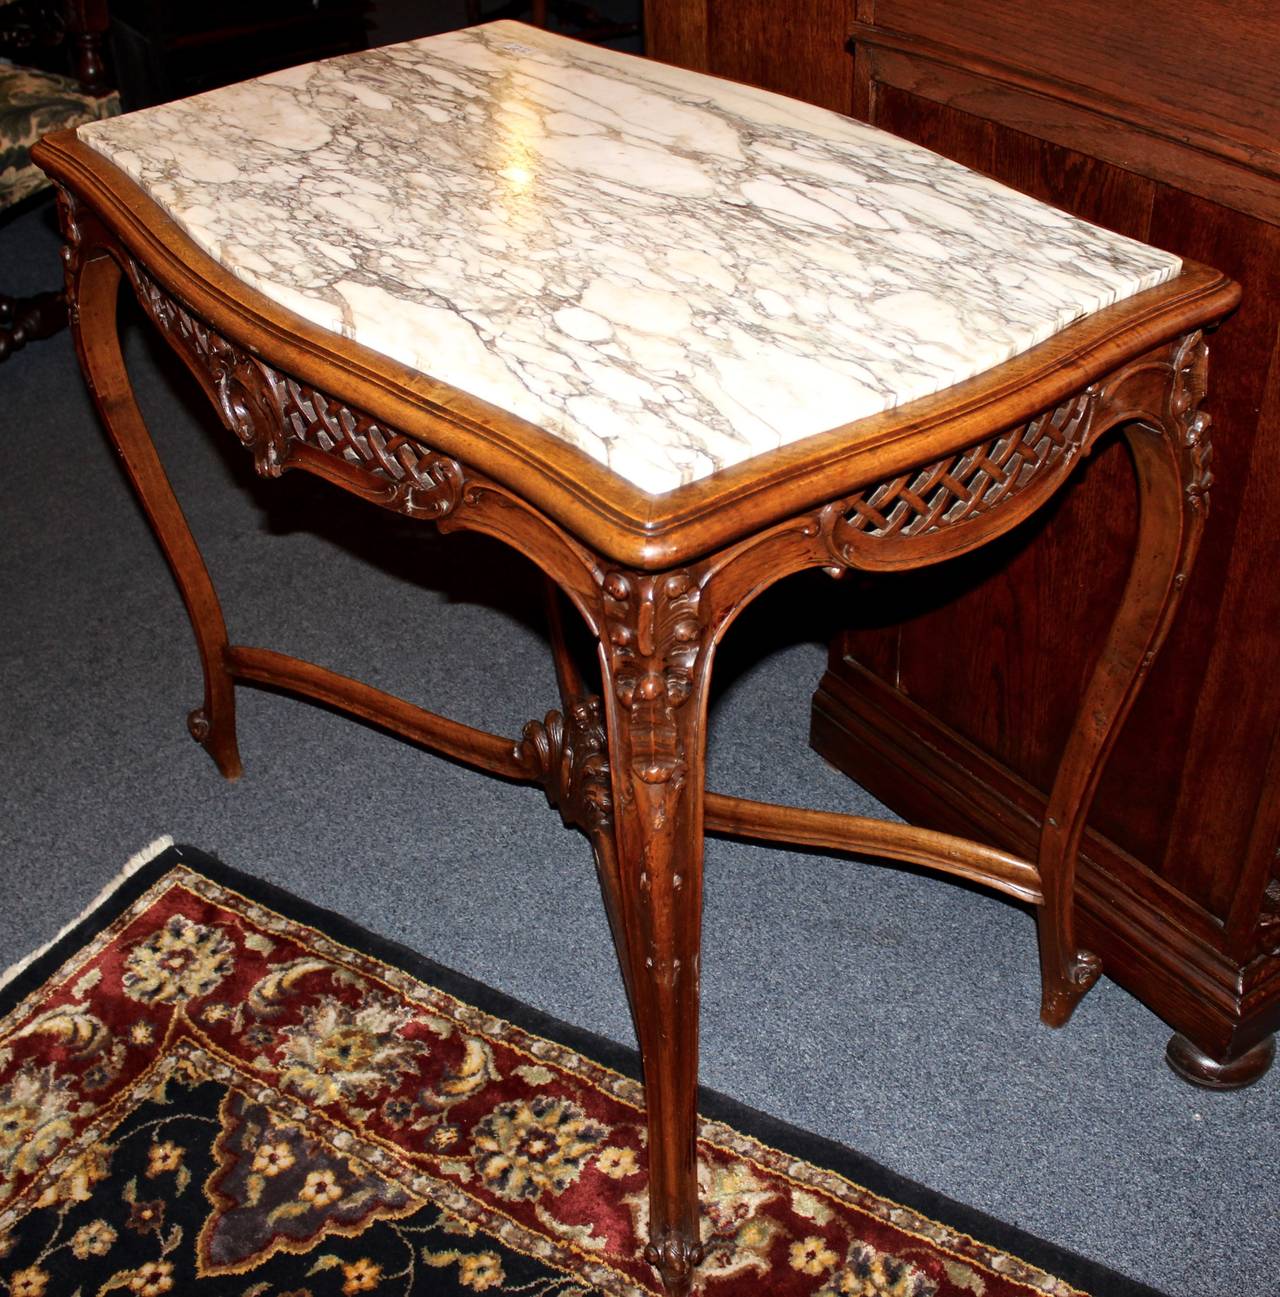 This French library table is made in the Louis XV style from walnut.  The table is adorned with hand-carved detail and is topped with white marble.  The "piercing" technique was used to create a gorgeous crosshatch pattern on each side.